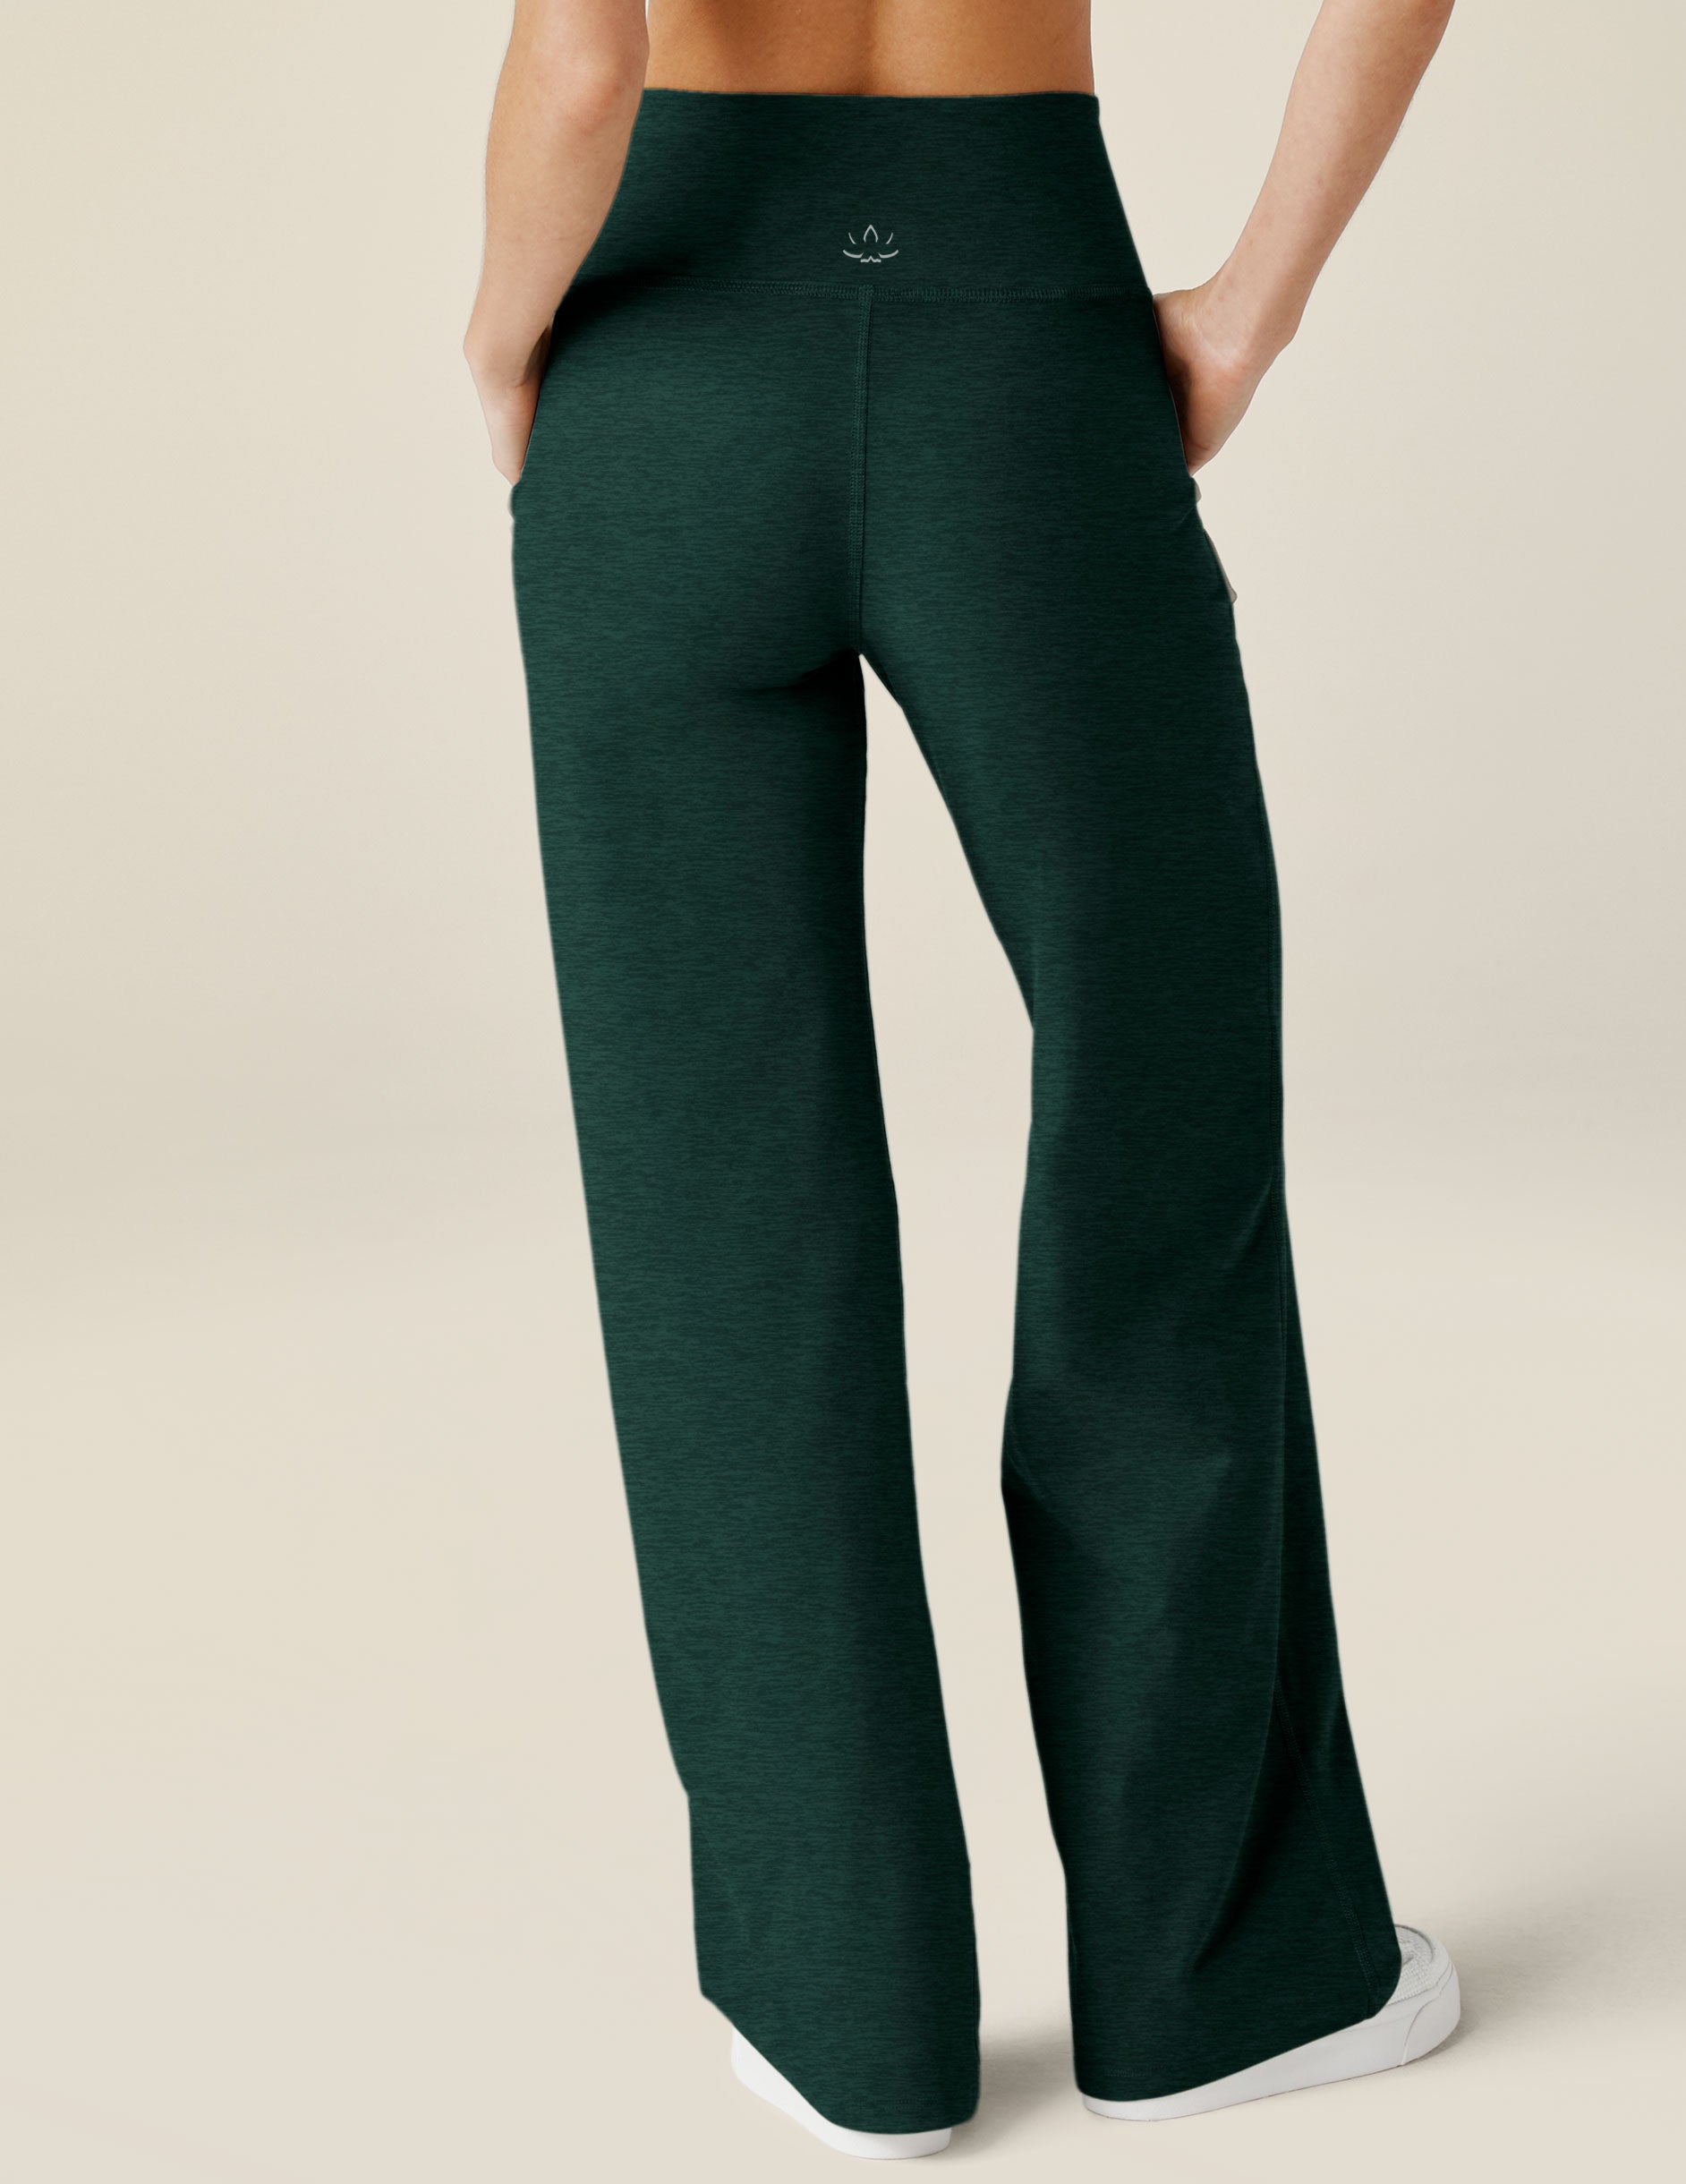 green high-waisted wide leg spacedye pants with pockets. 